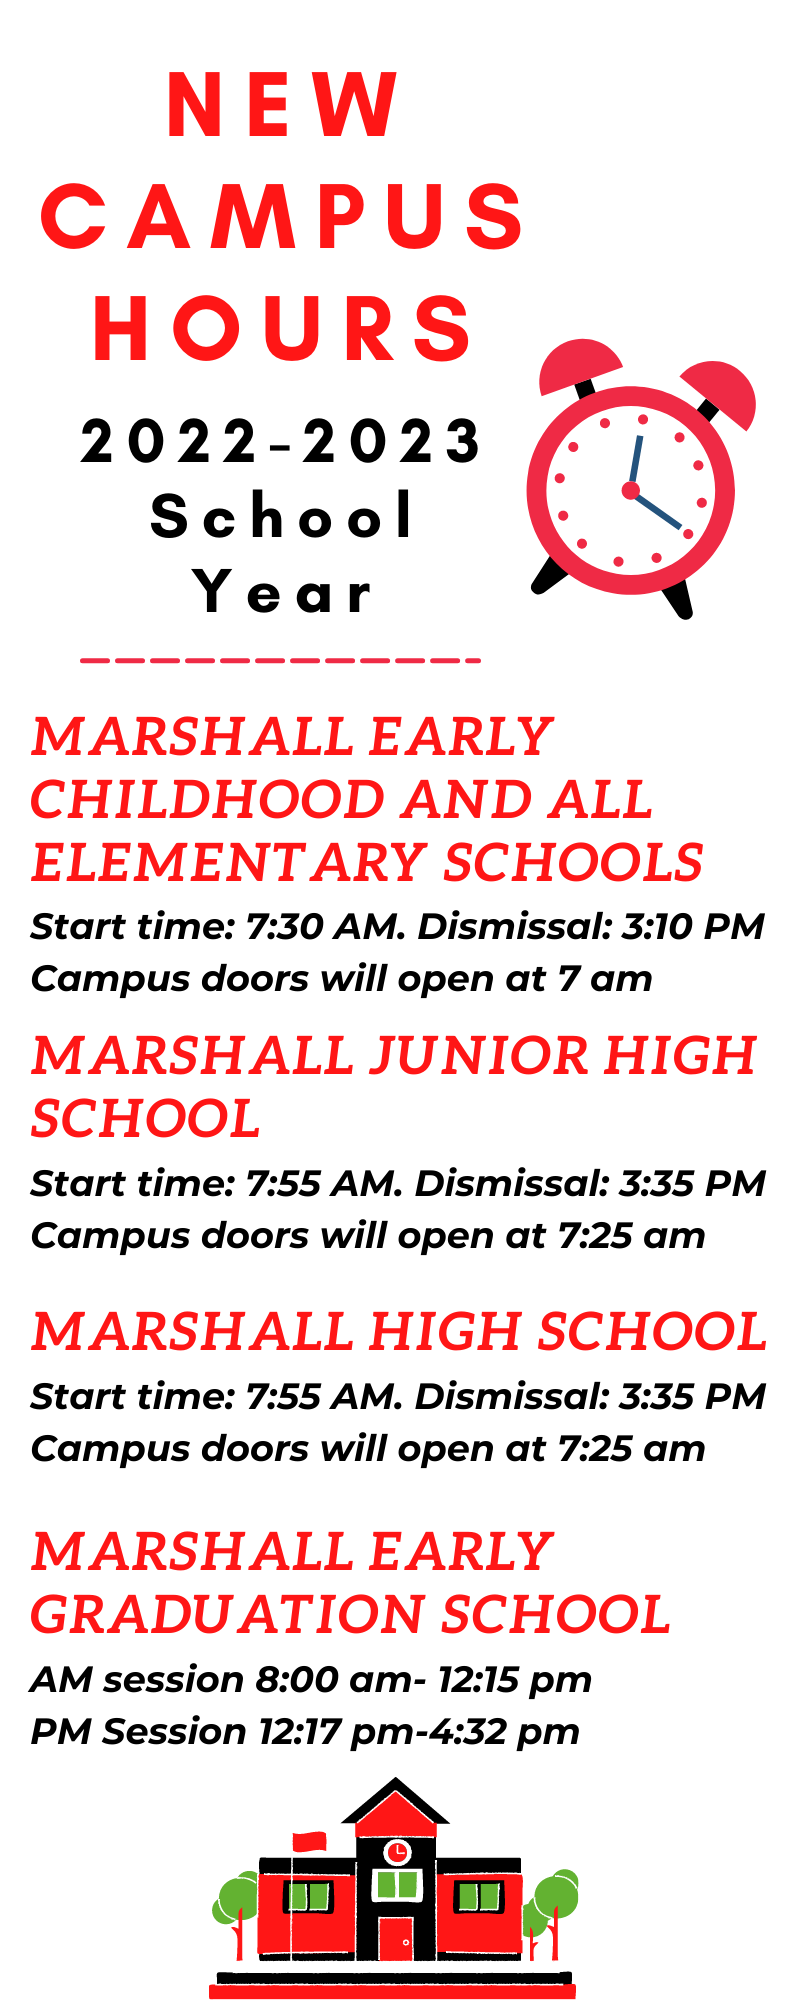 New Campus Hours for the 2022-2023 school year